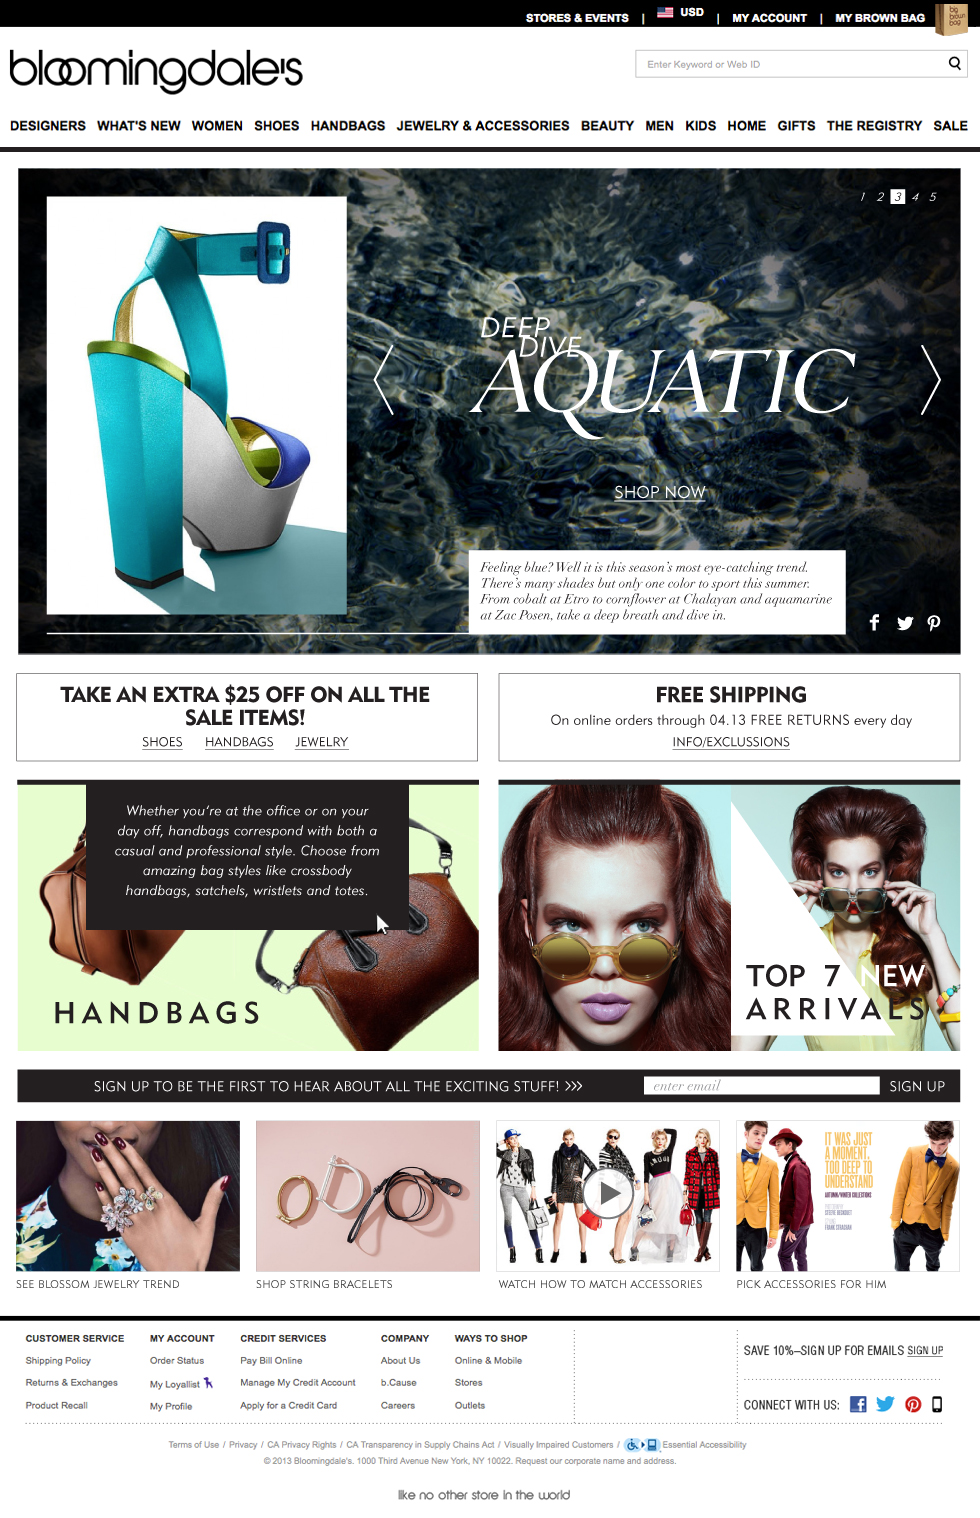 3-Accessory-Trends-Homepage-Rollover.jpg